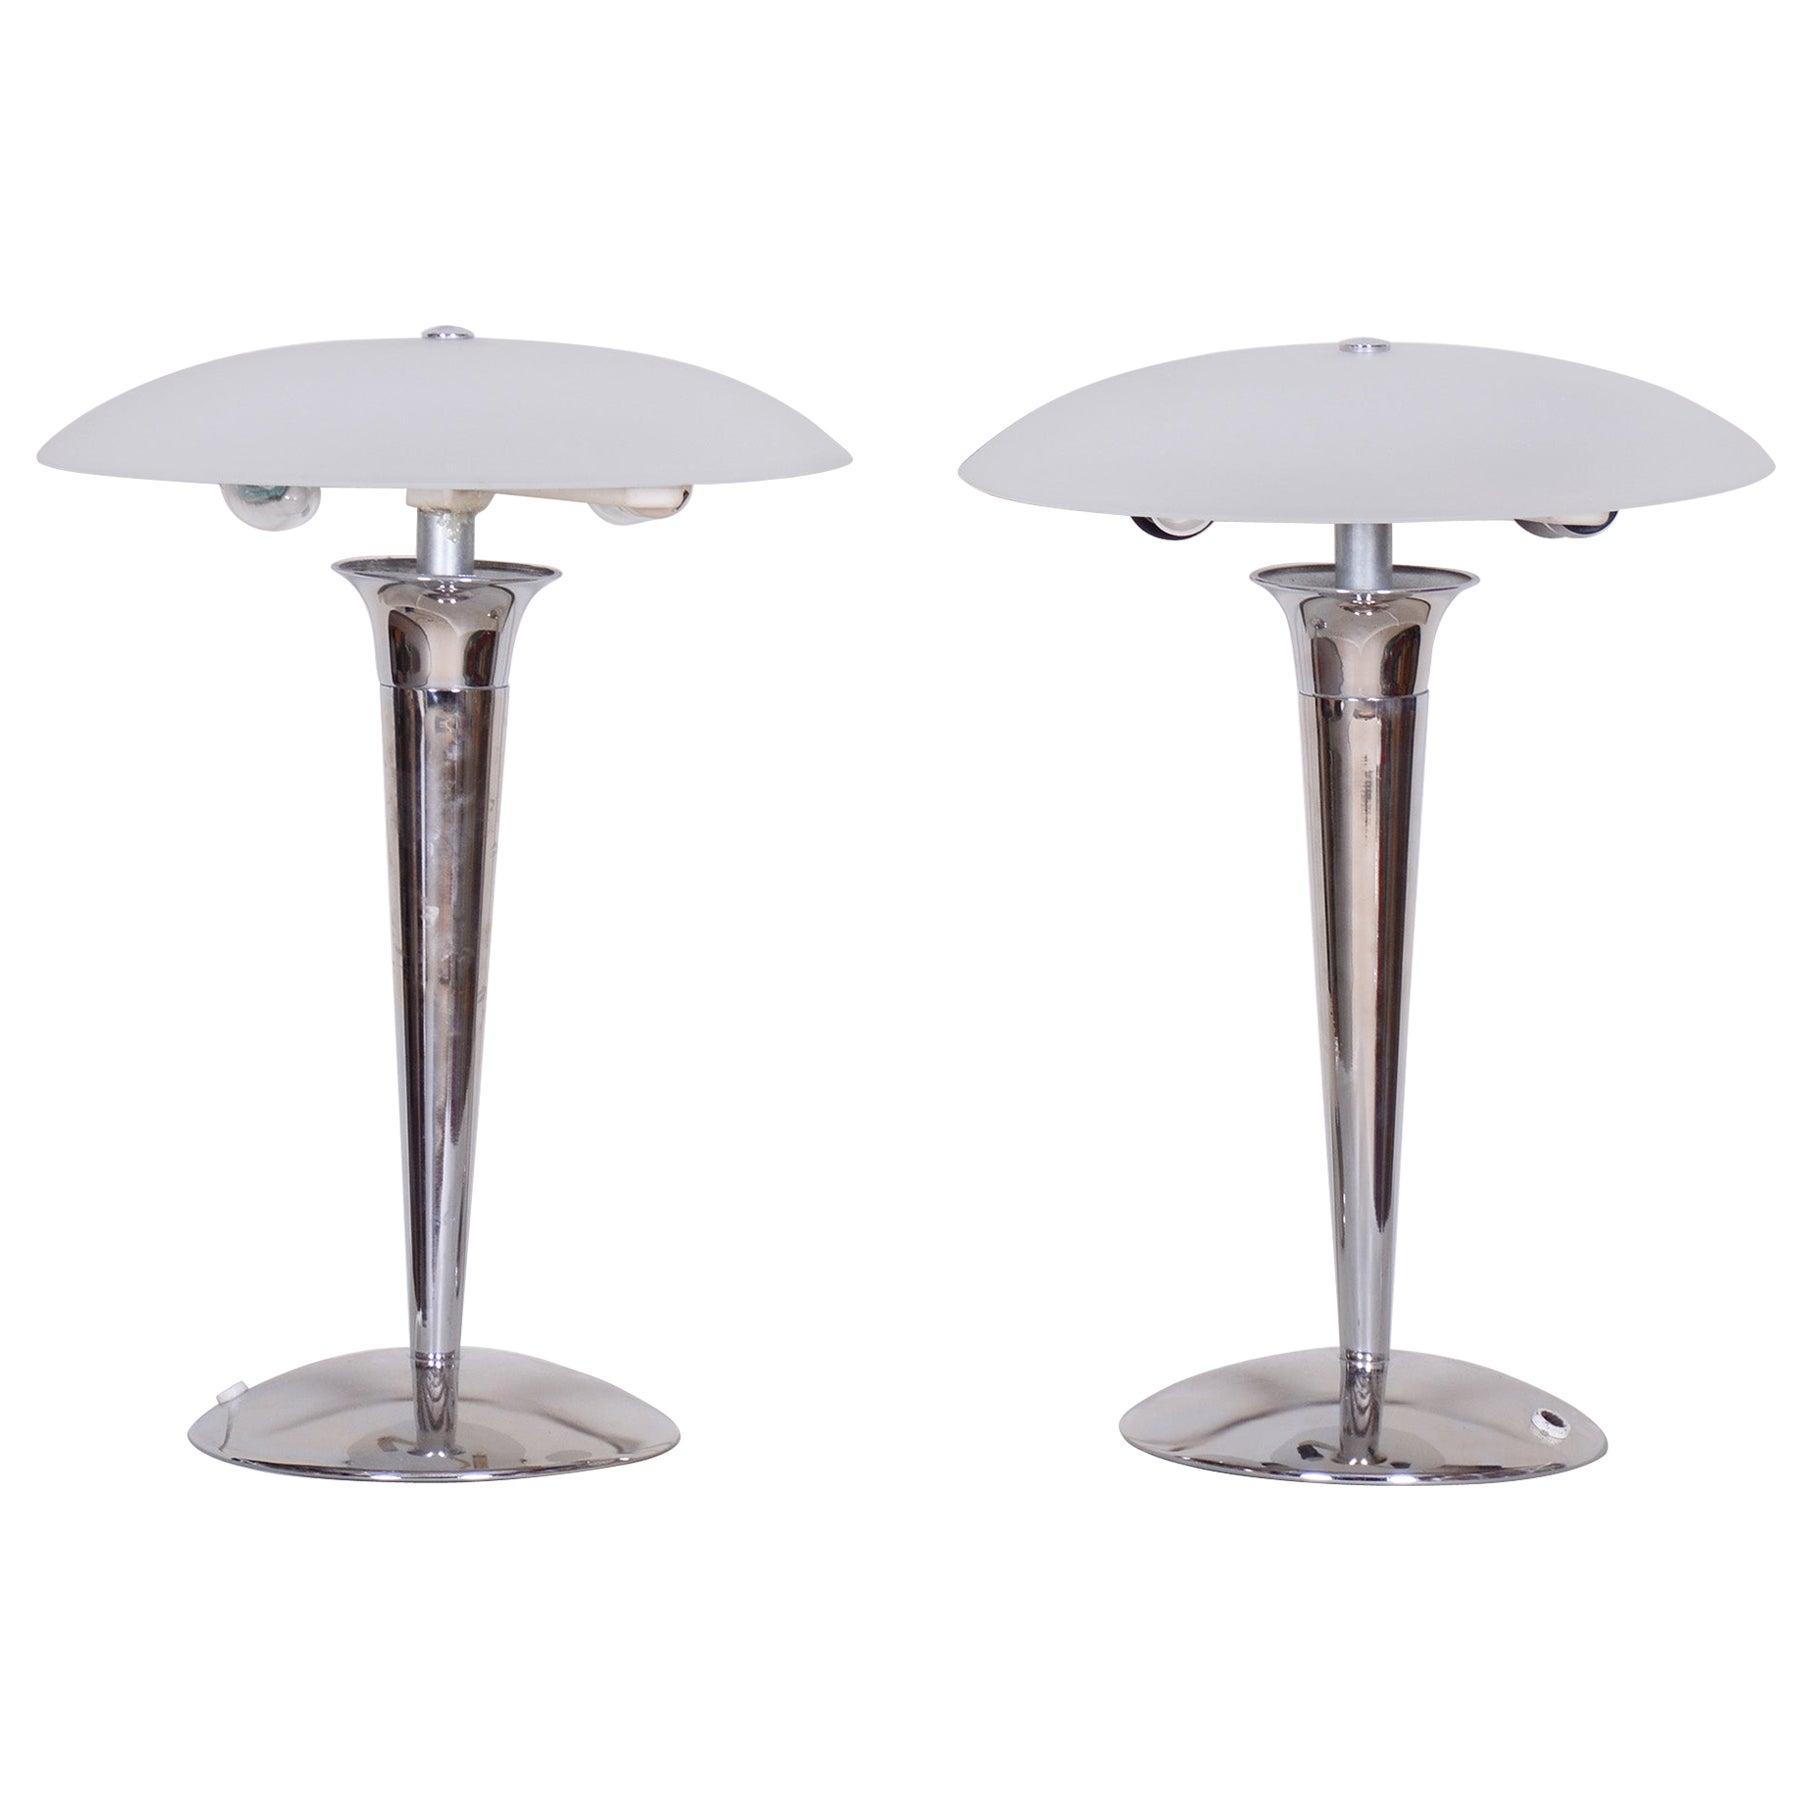 Pair of Midcentury Table Lamps, Chrome-Plated Steel, Milk Glass, Germany, 1950s